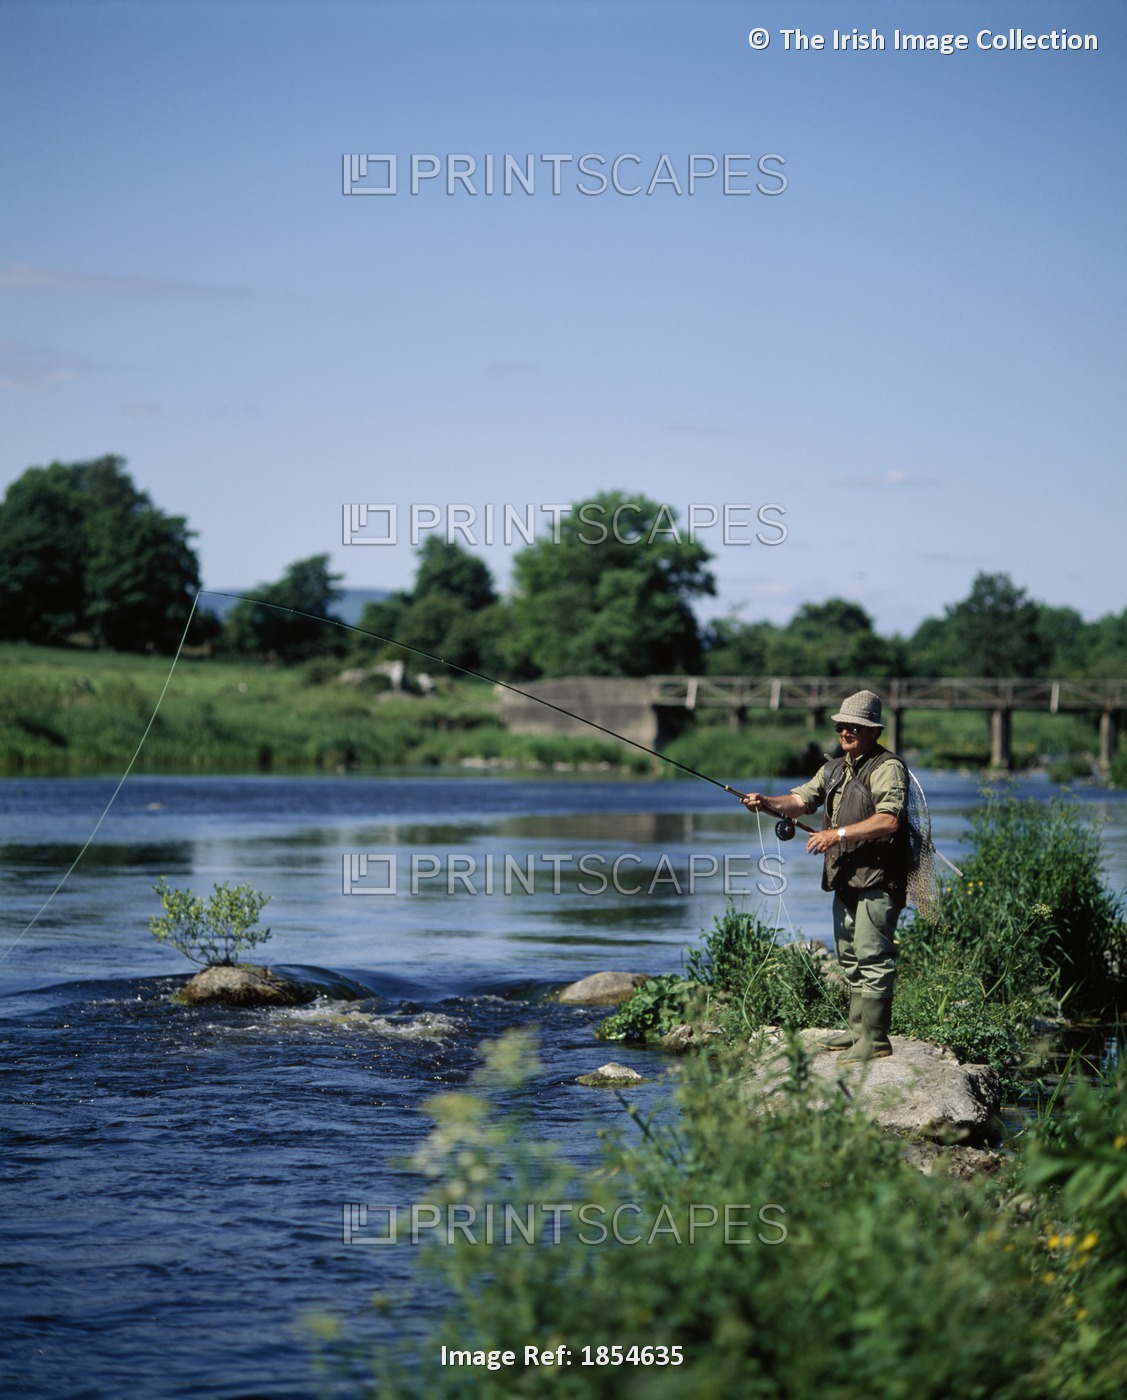 Man Fishing, Castleconnell, County Limerick, Ireland